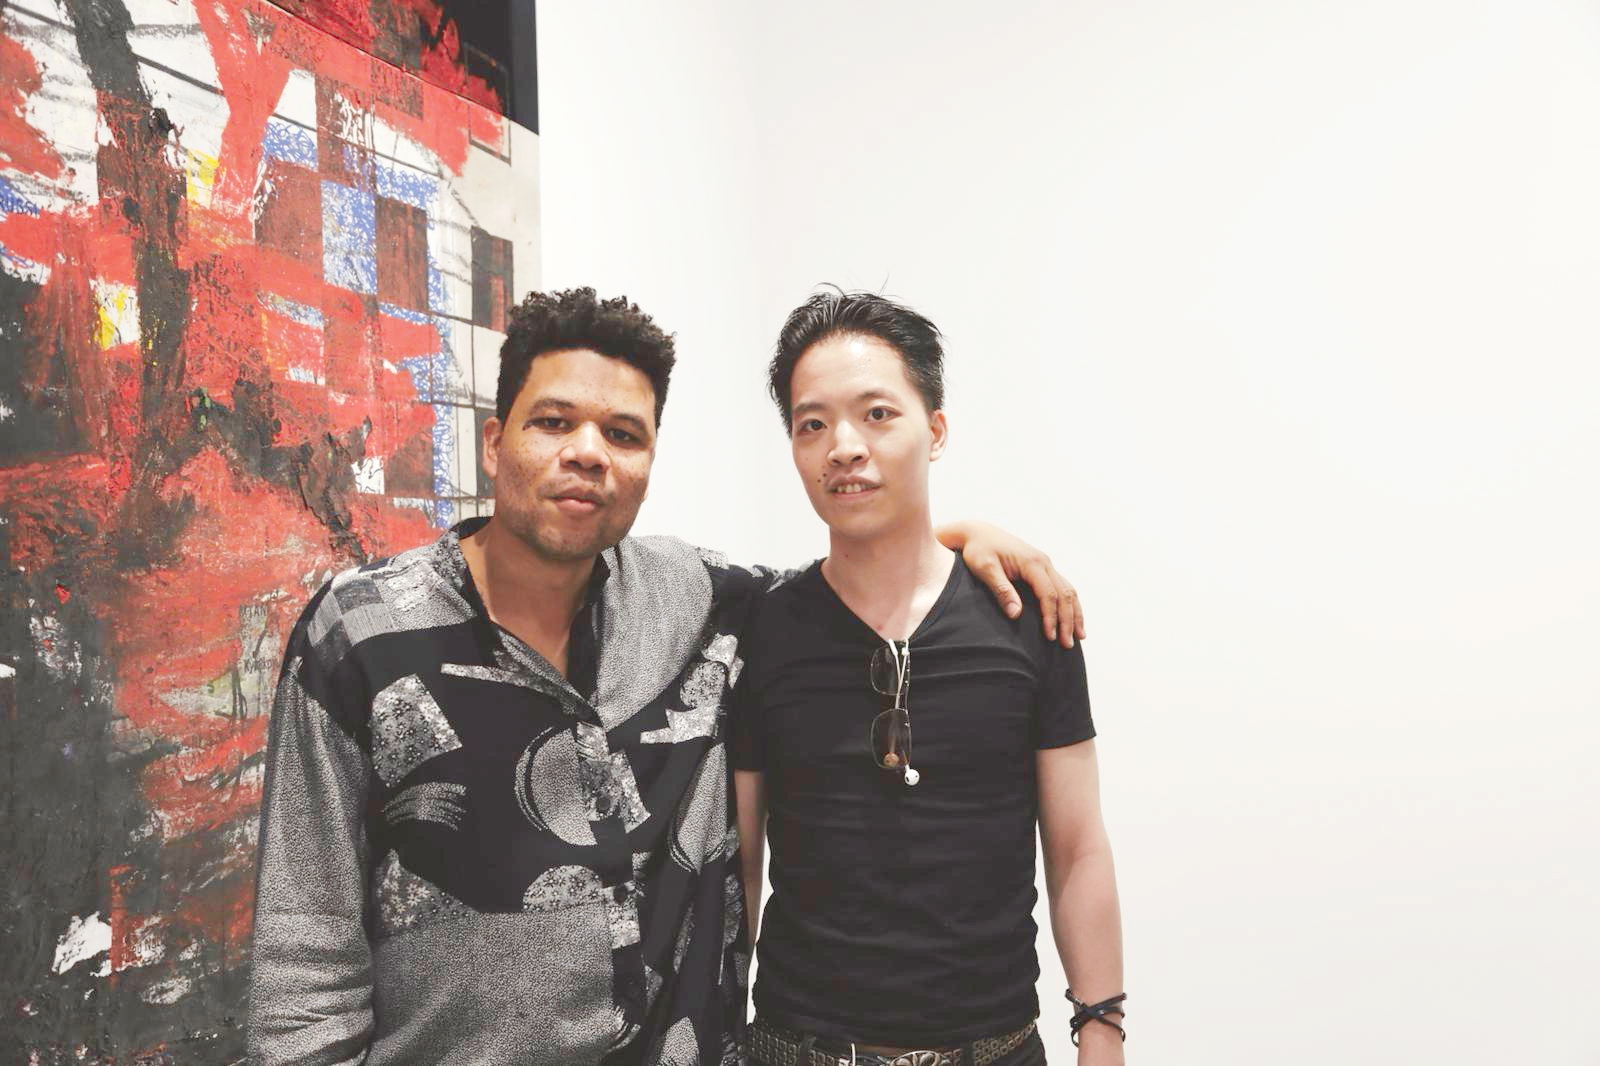 Michael Andrew Law Cheuk Yui ( 羅卓睿 ) and Oscar Murillo ( 奧斯卡·牟利羅 )